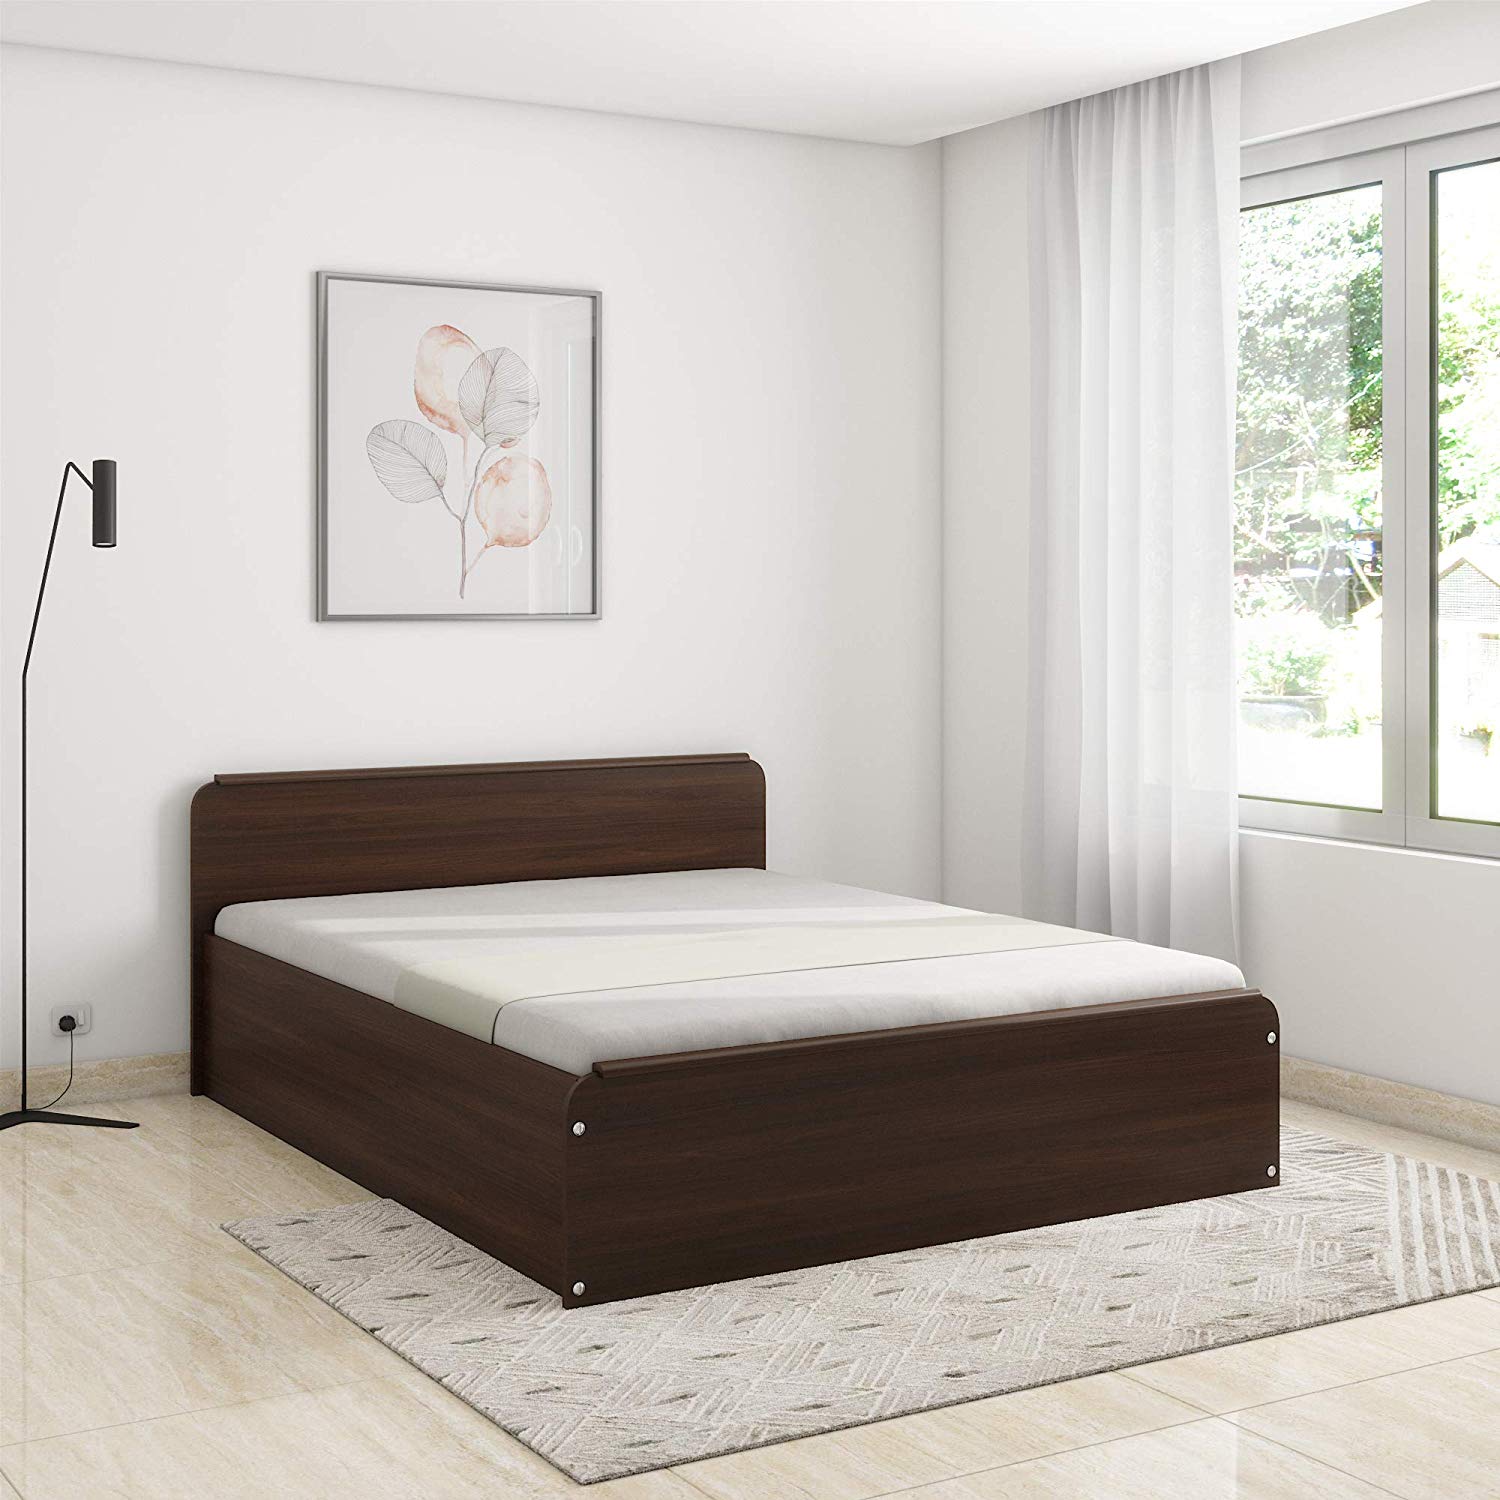 Solimo Polaris Engineered Wood Queen Bed with Box Storage (Walnut Finish)